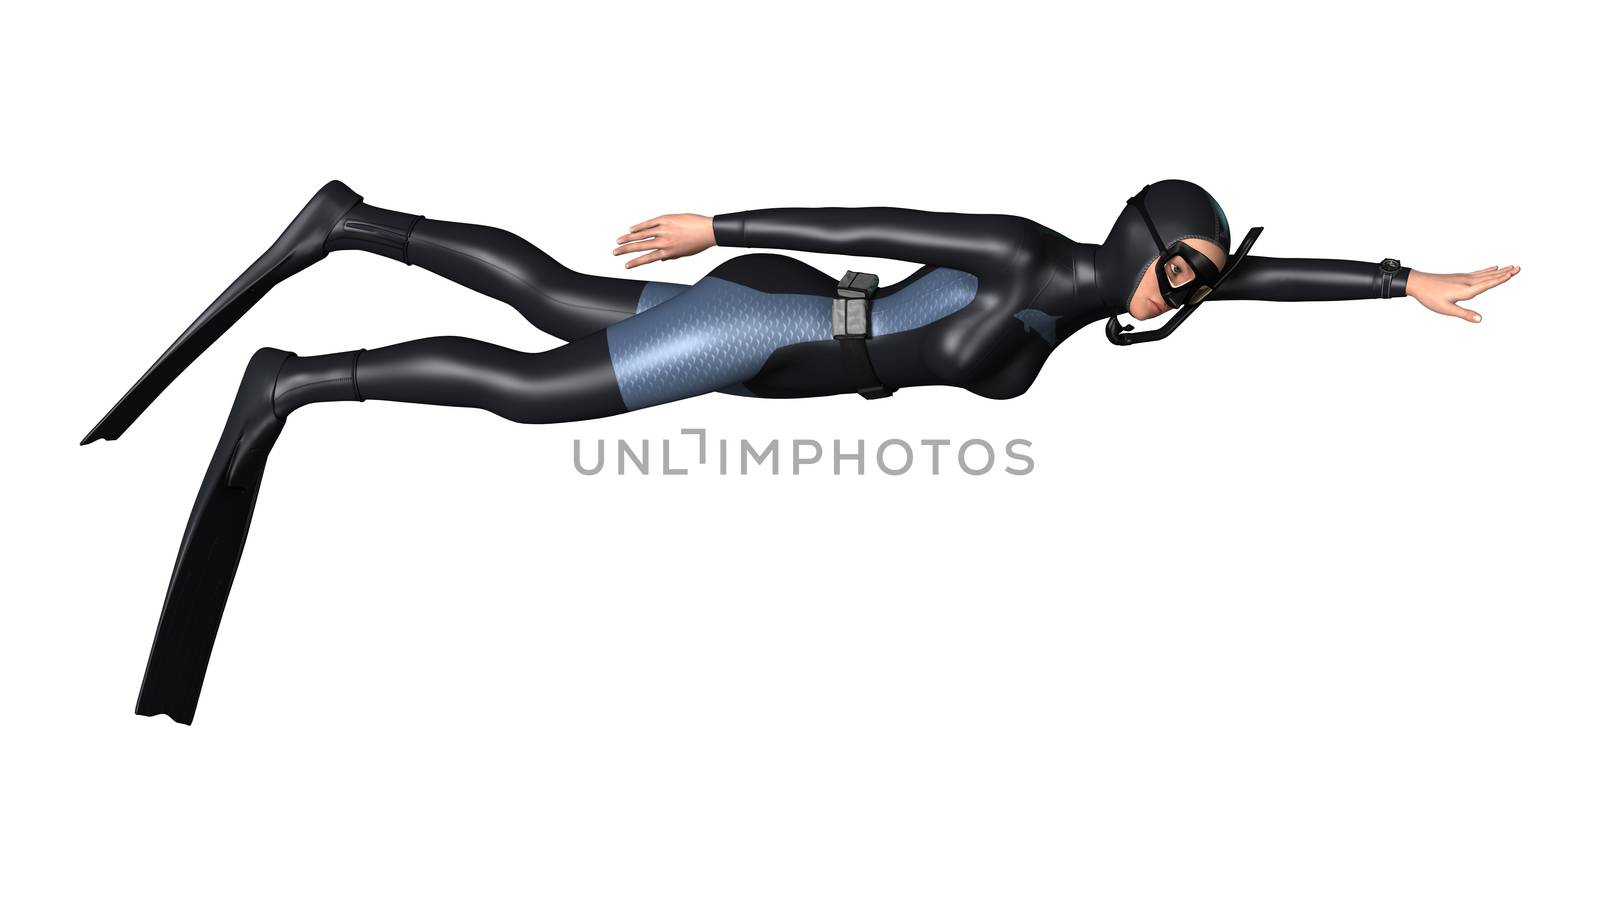 3D digital render of a female diver isolated on white background